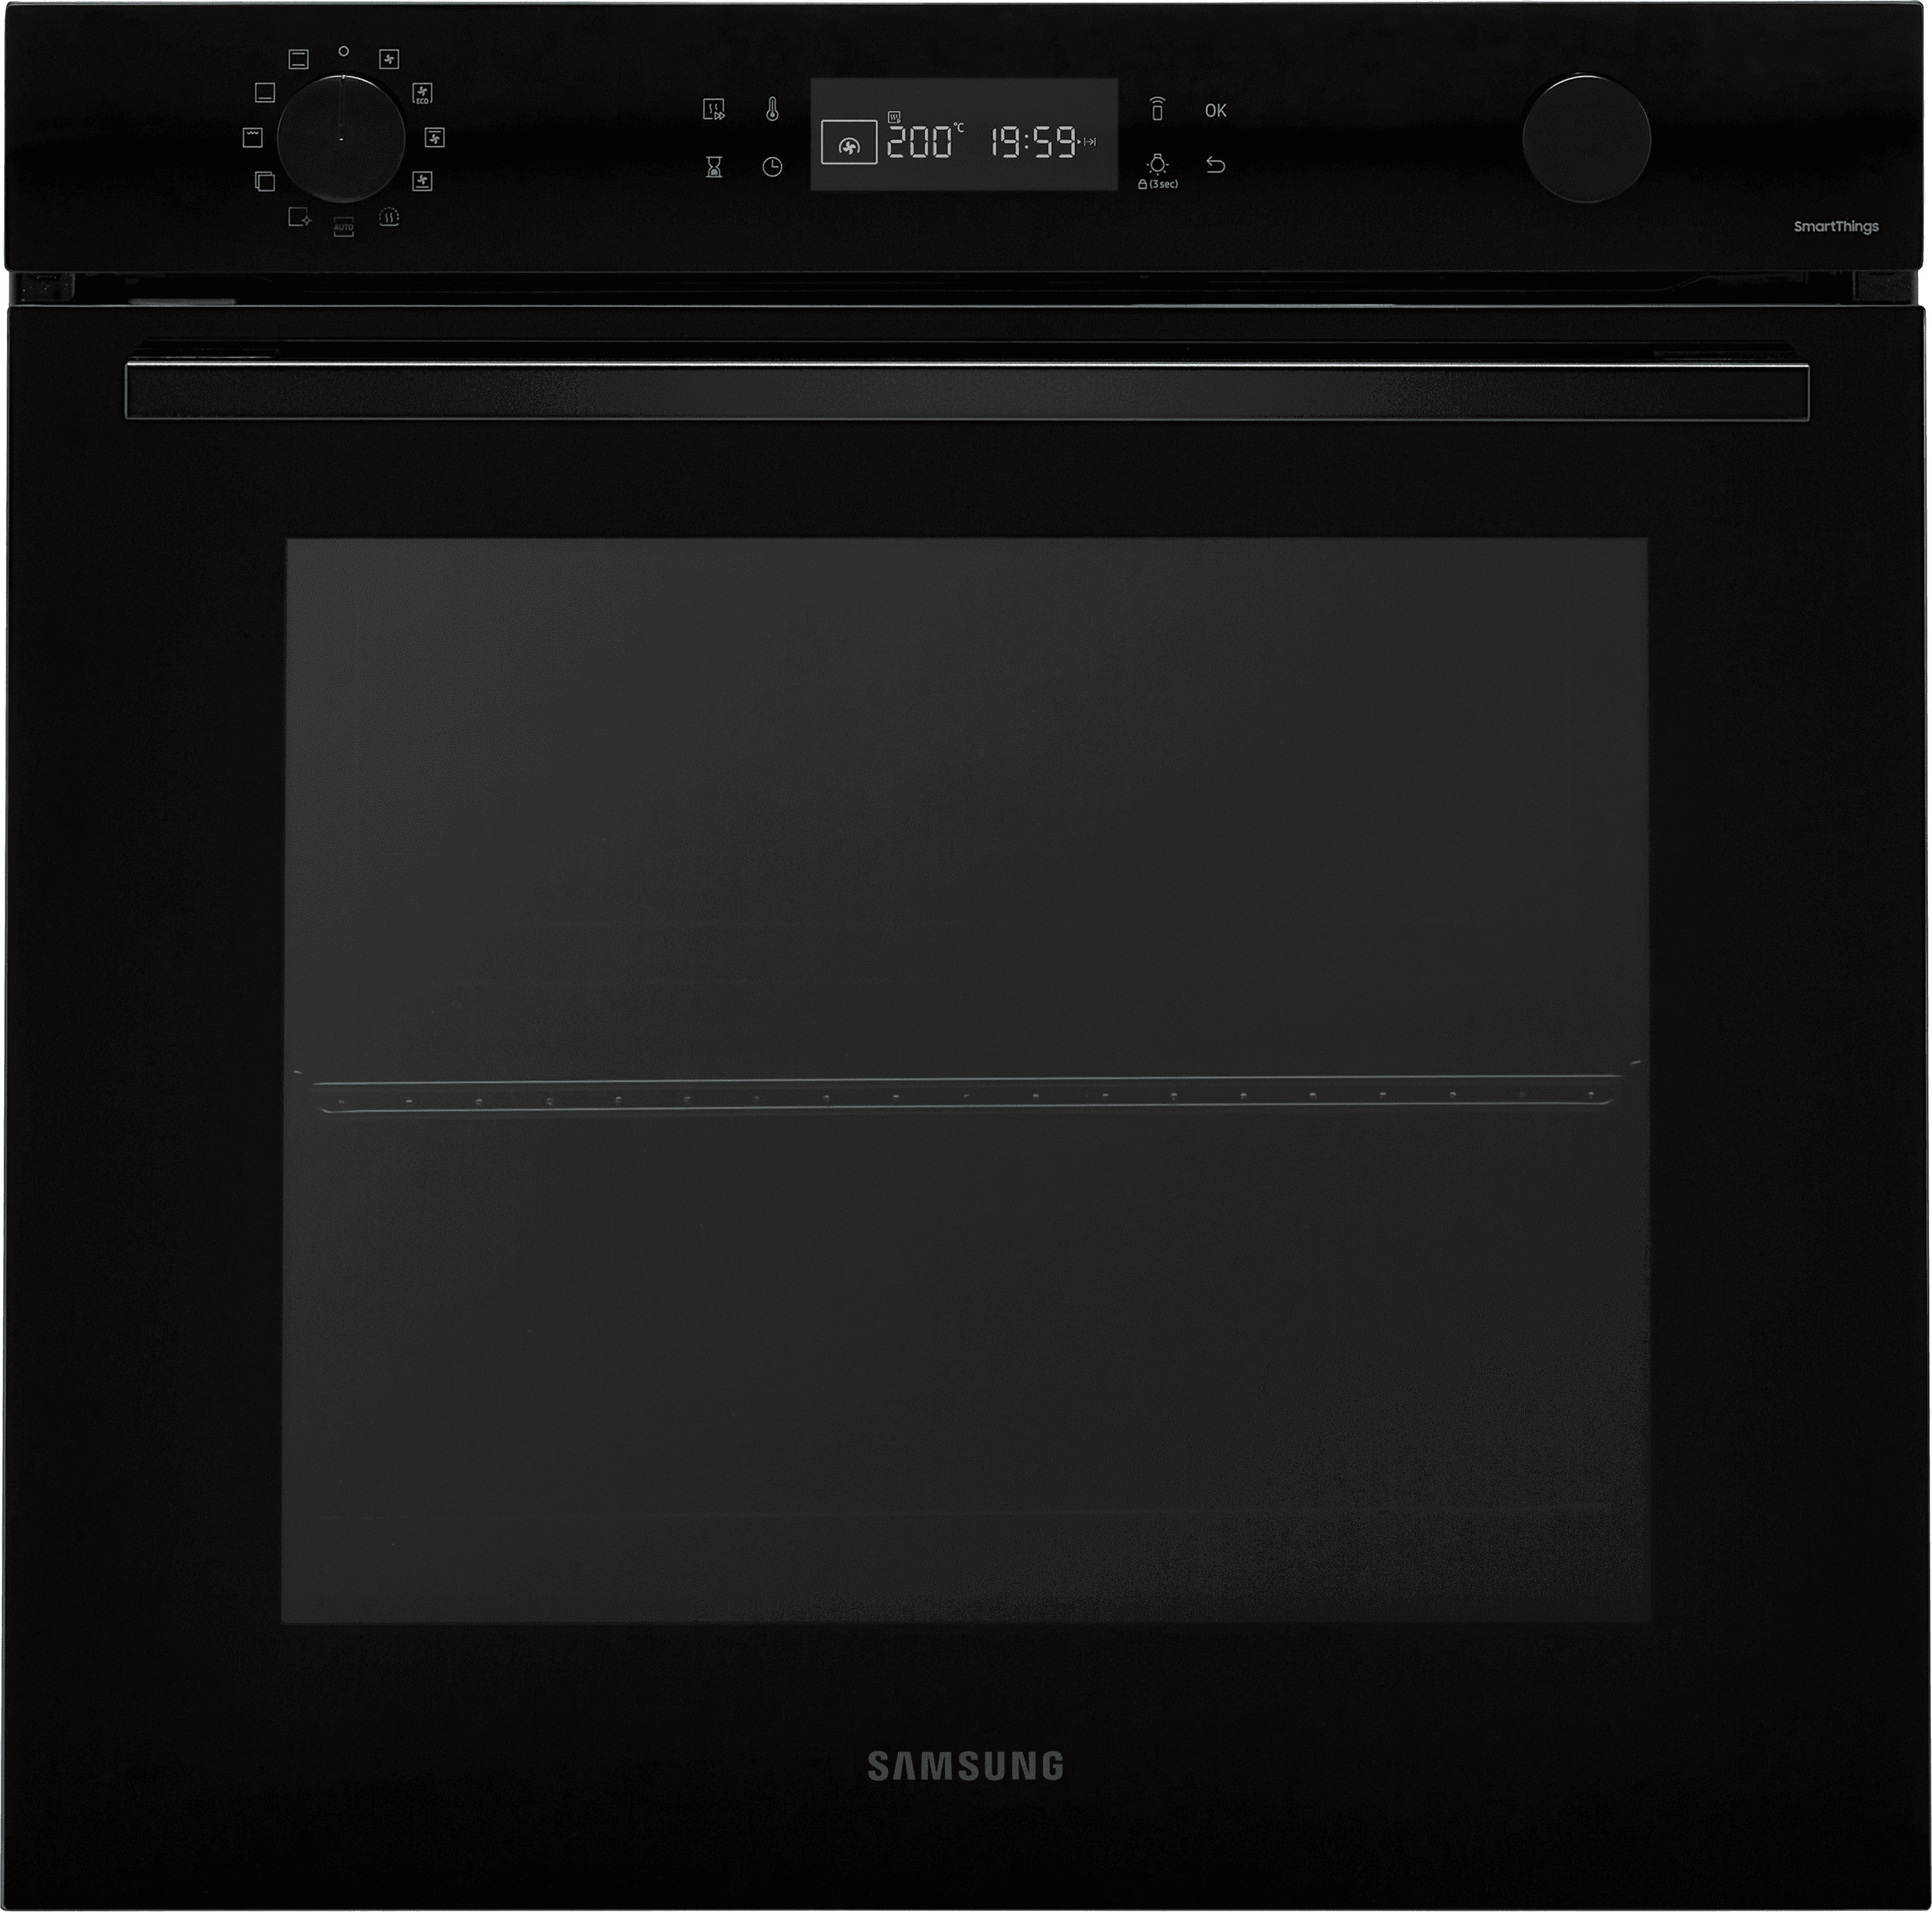 Samsung Bespoke Series 4 NV7B41307AK Wifi Connected Built In Electric Single Oven and Pyrolytic Cleaning - Black Glass - A+ Rated, Black